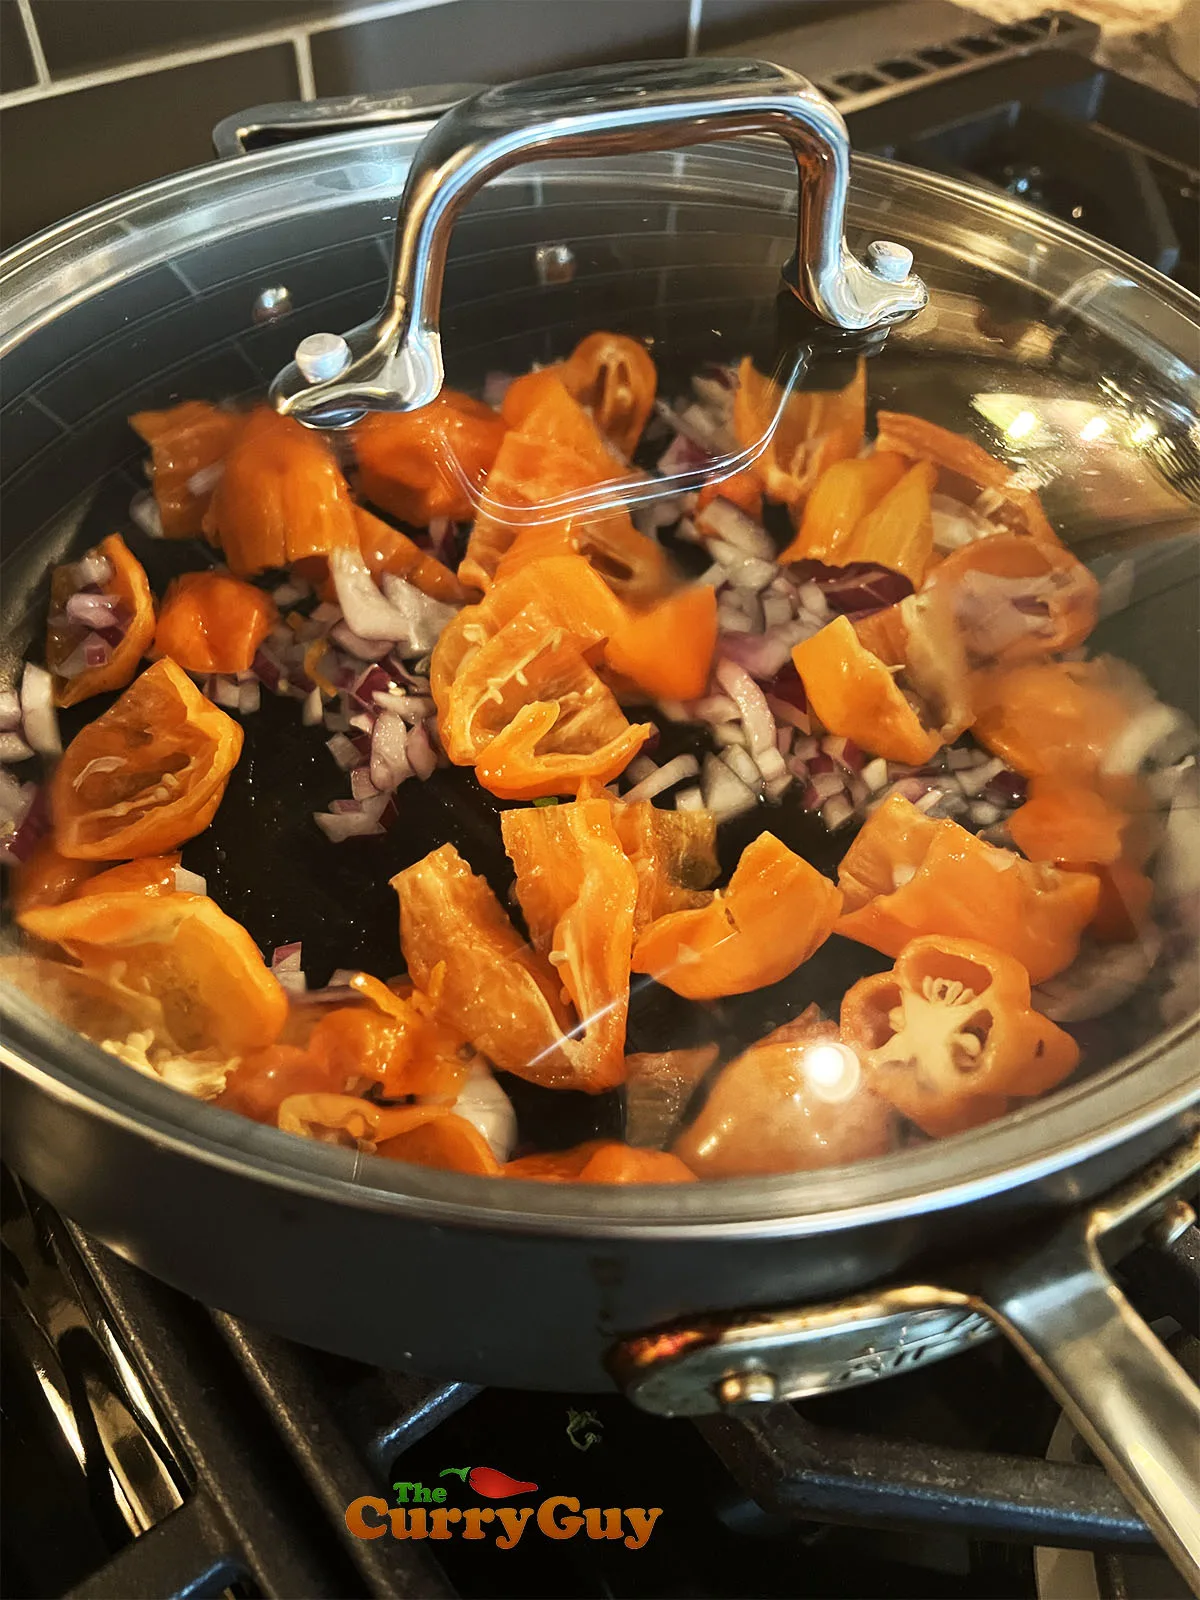 Frying the habanero chilies, garlic and onion in olive oil.